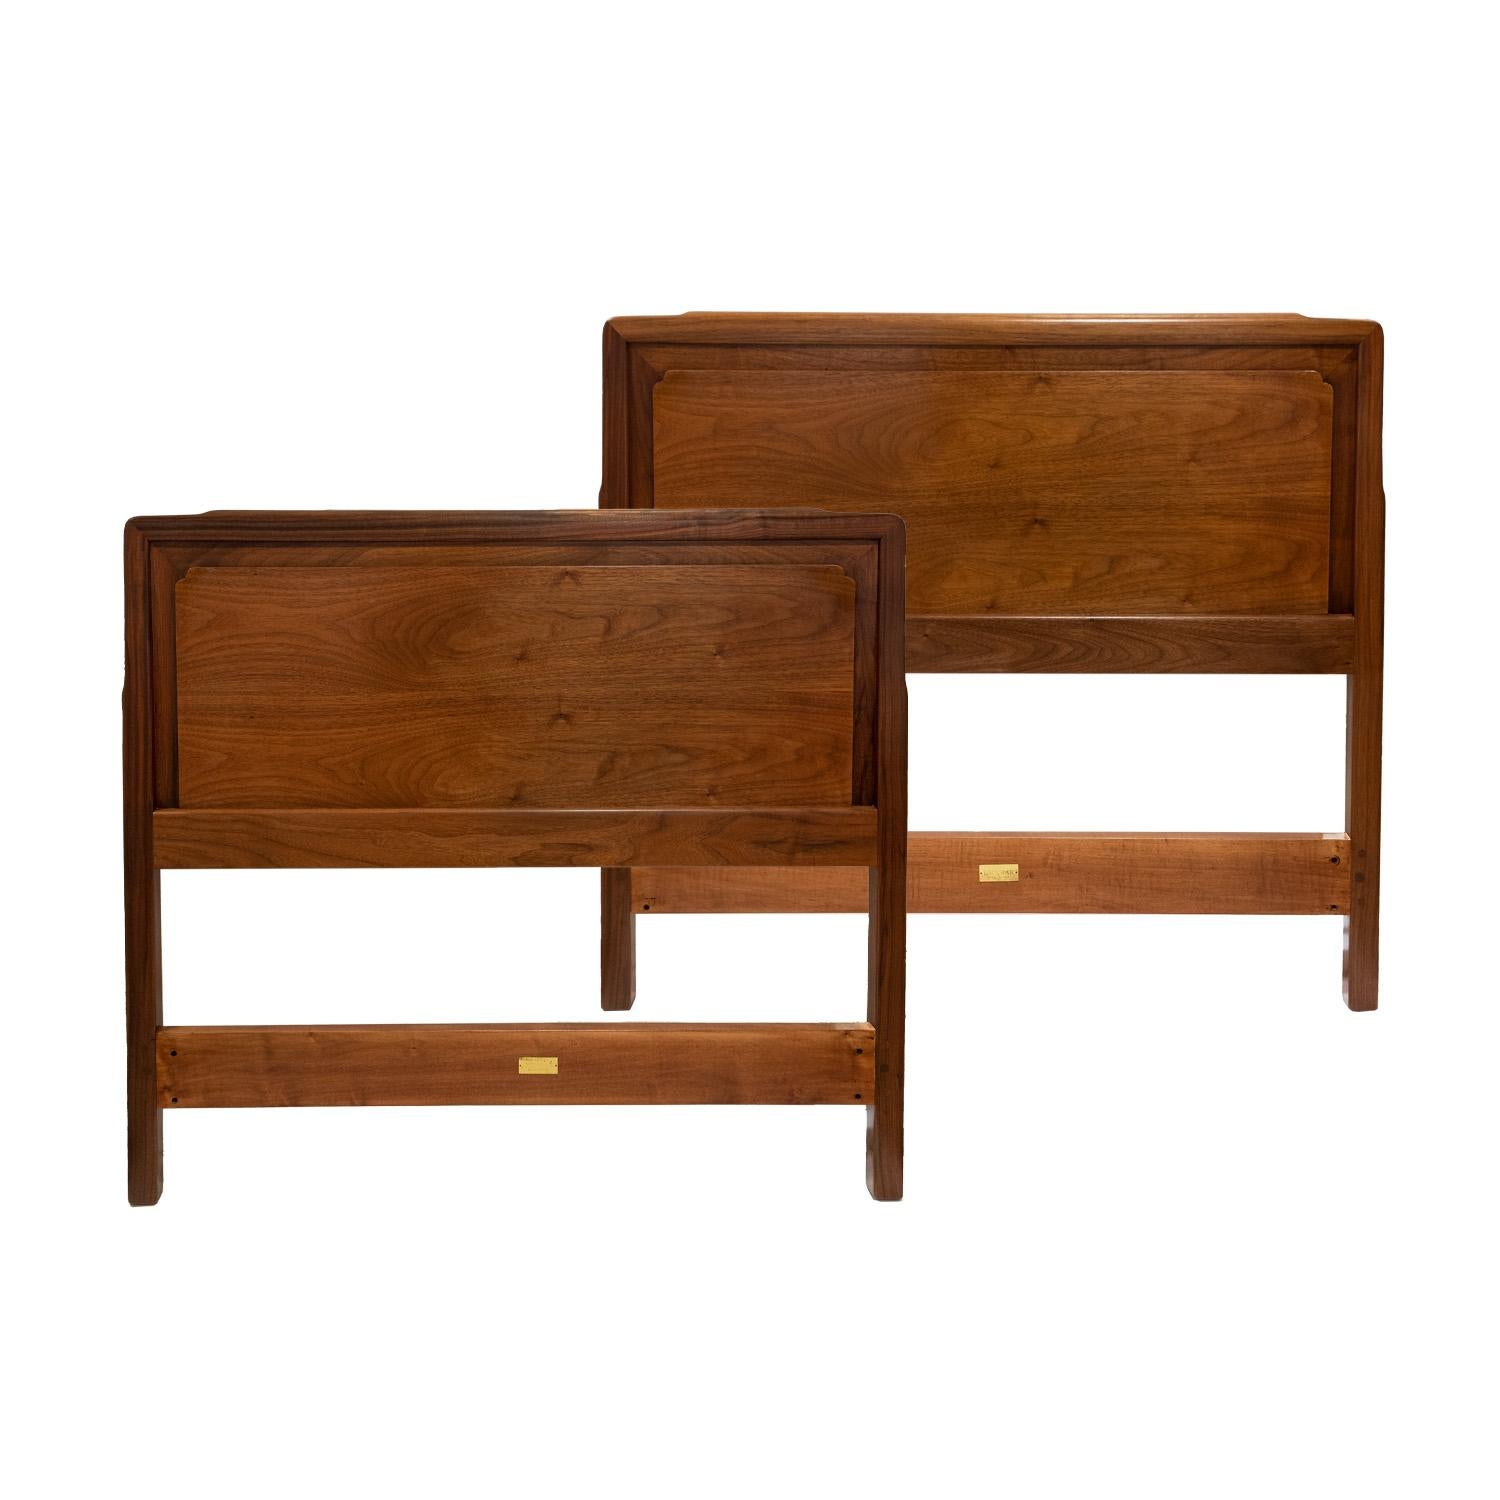 Pair of rare twin headboards model no. 5731 in sculpted walnut from the Janus Series by Edward Wormley for Dunbar, American 1957 (with original metal labels signed “DUNBAR Berne, Indiana”). Finely crafted, this model is rare and was only made in